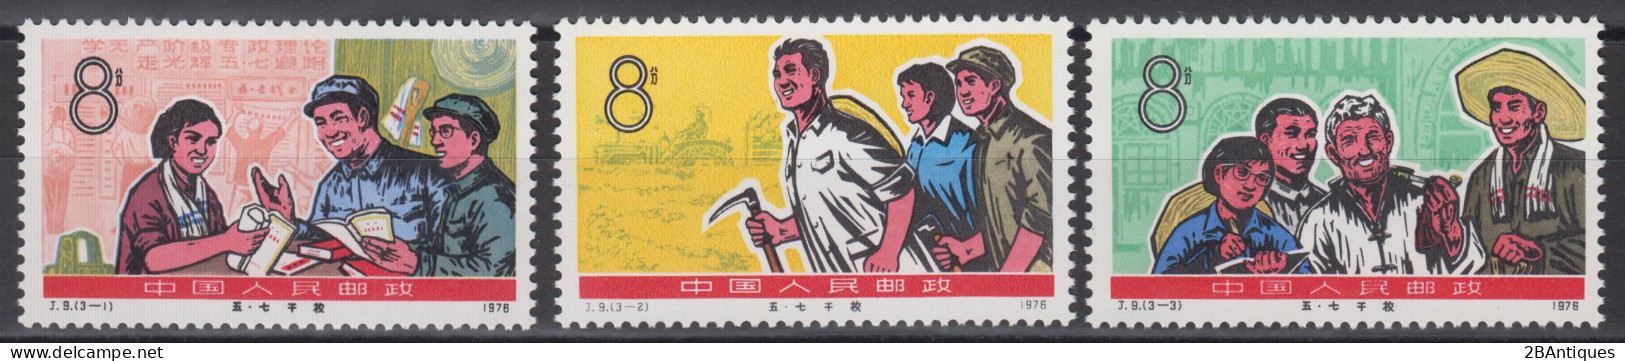 PR CHINA 1976 - The 10th Anniversary Of Mao's "May 7 Directive" MNH** OG XF - Unused Stamps